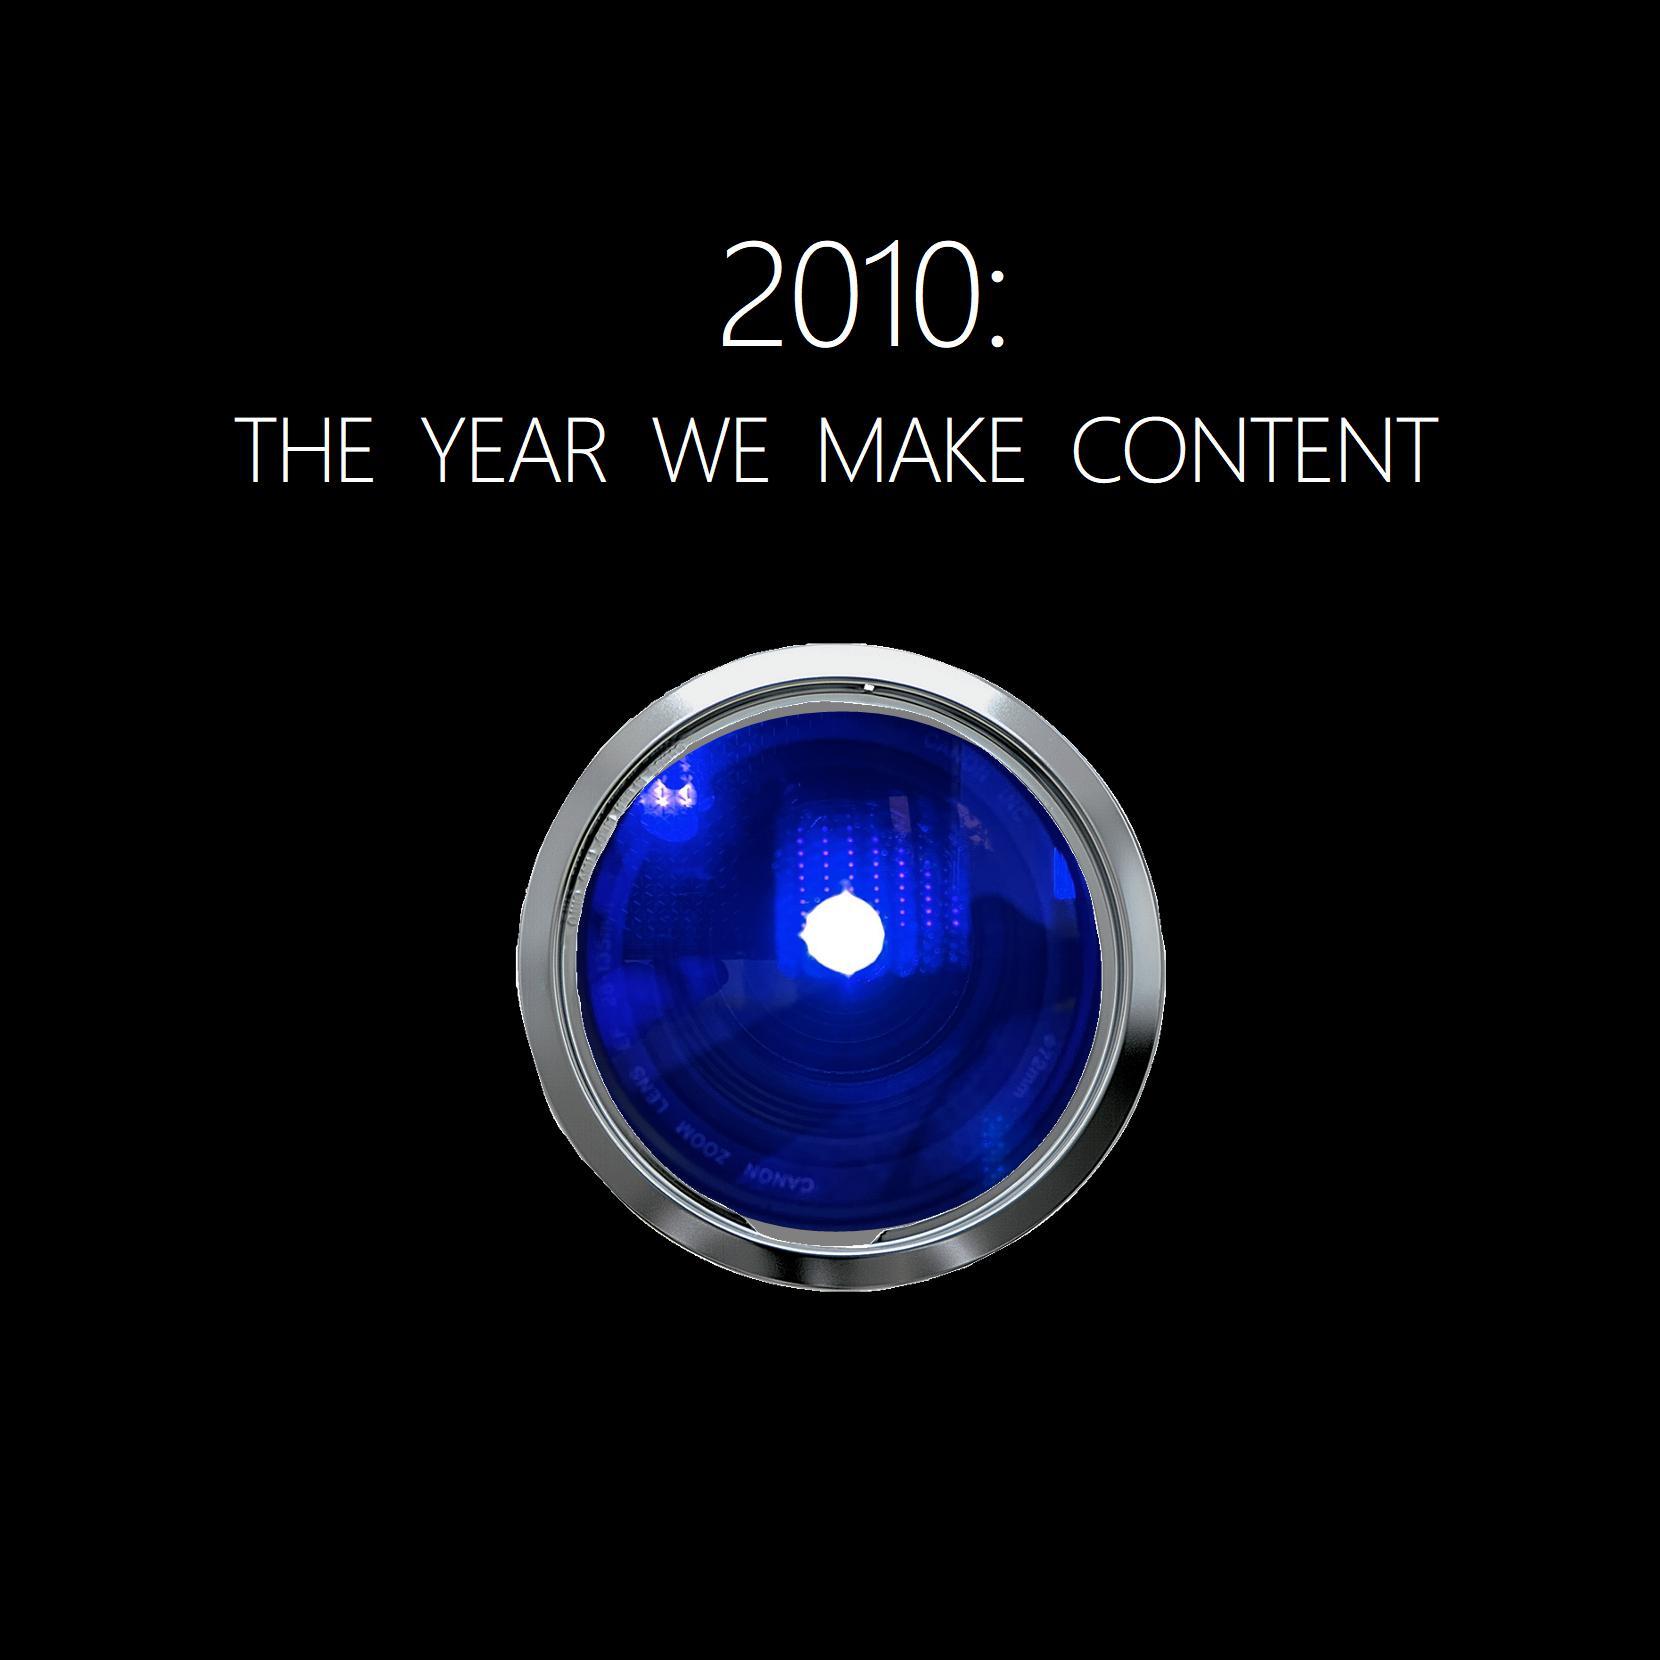 Episode 40 - 2010: The Year We Make Content